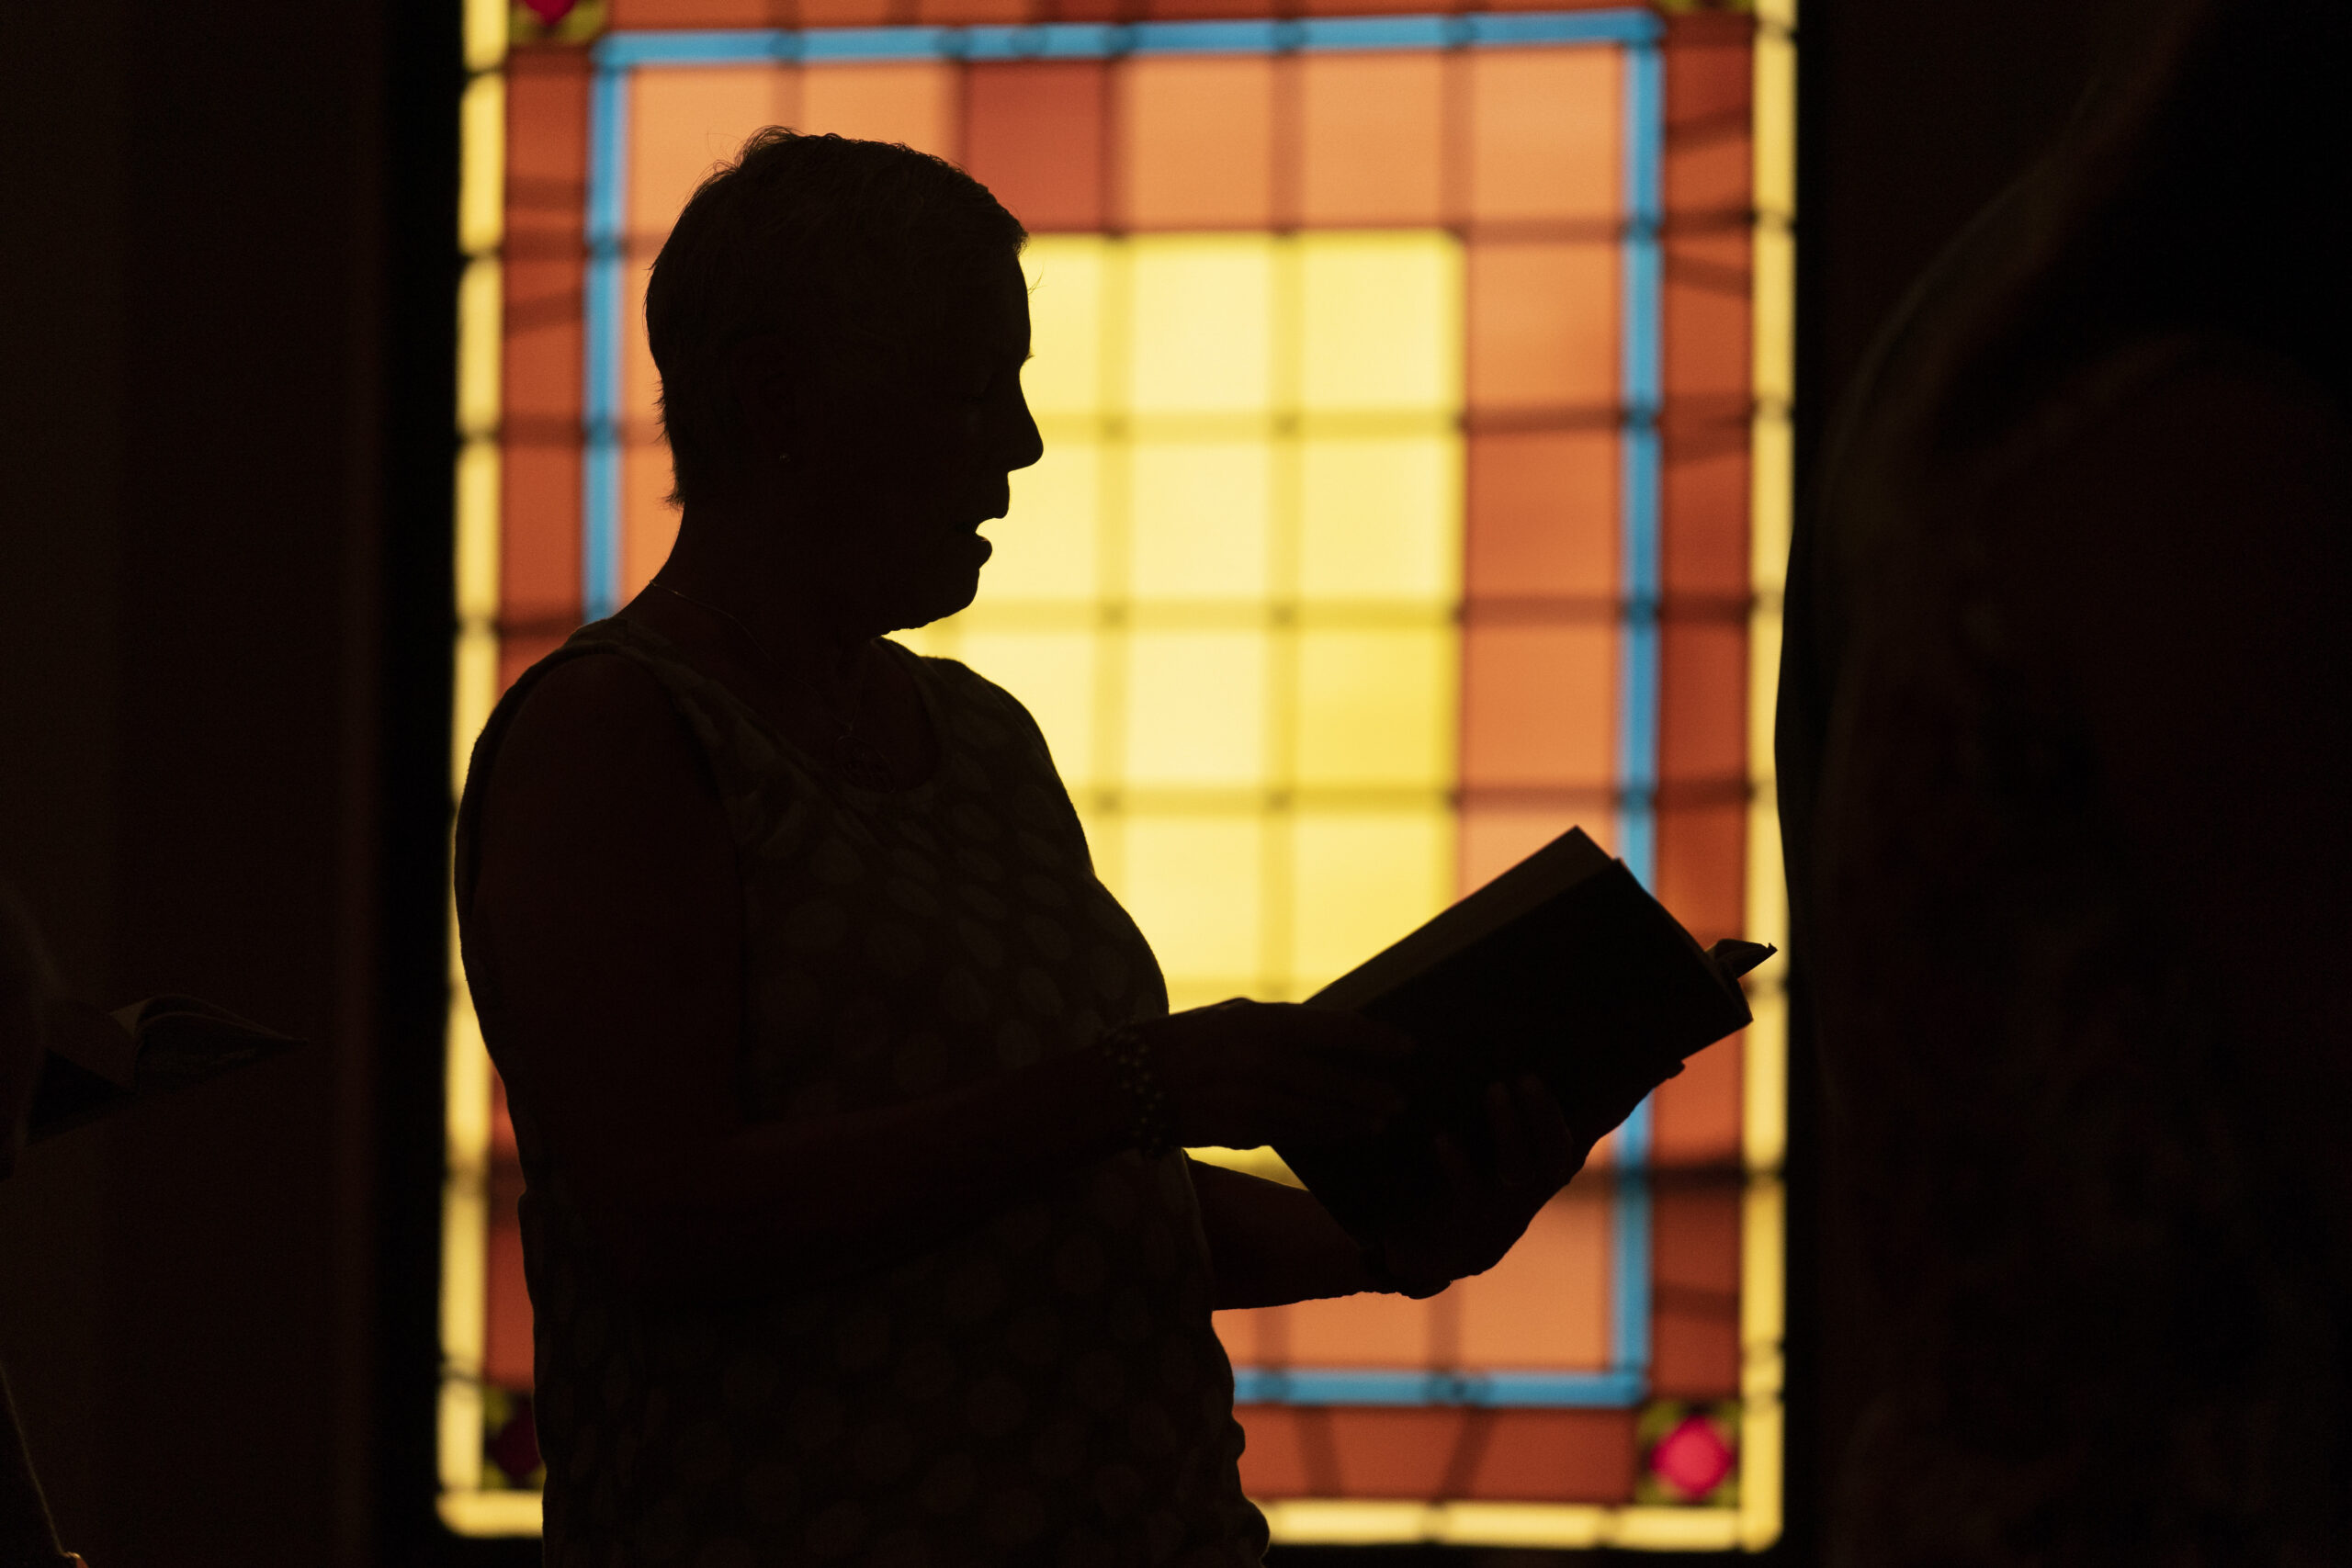 A member of Waldoboro United Methodist Church sings a hymn during a service, Sunday, June 20, 2021, in Waldoboro, Maine. The drop in attendance at the church, in part due to COVID-19, forced its closure. The last sermon was on June 27. (AP Photo/Robert F. Bukaty)